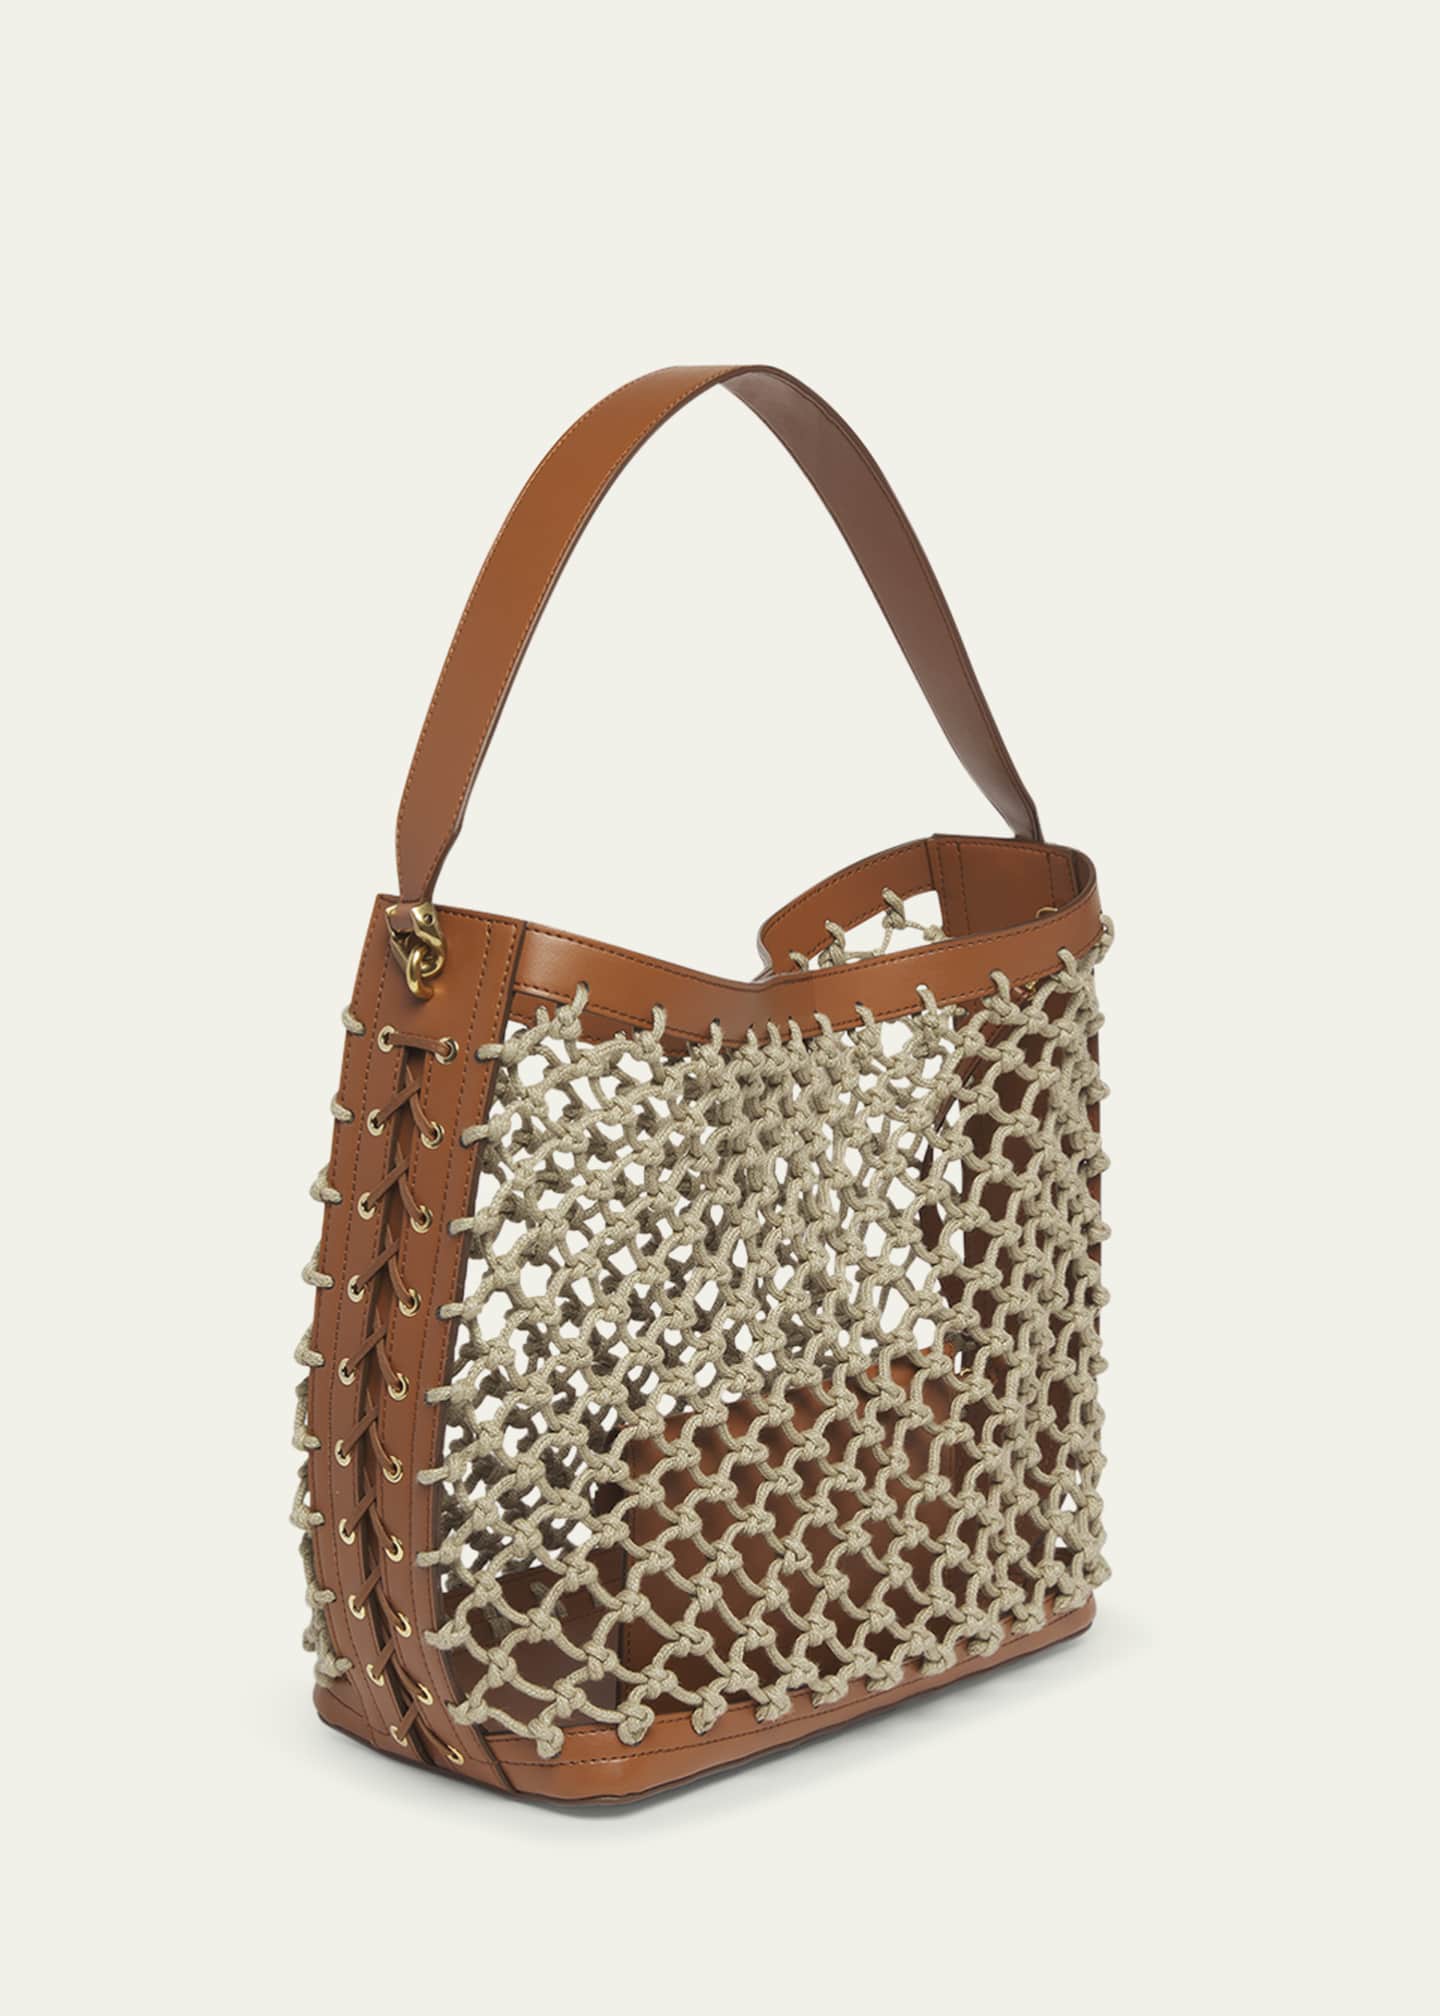 Stella McCartney Eco Mesh Knotted Tote Bag